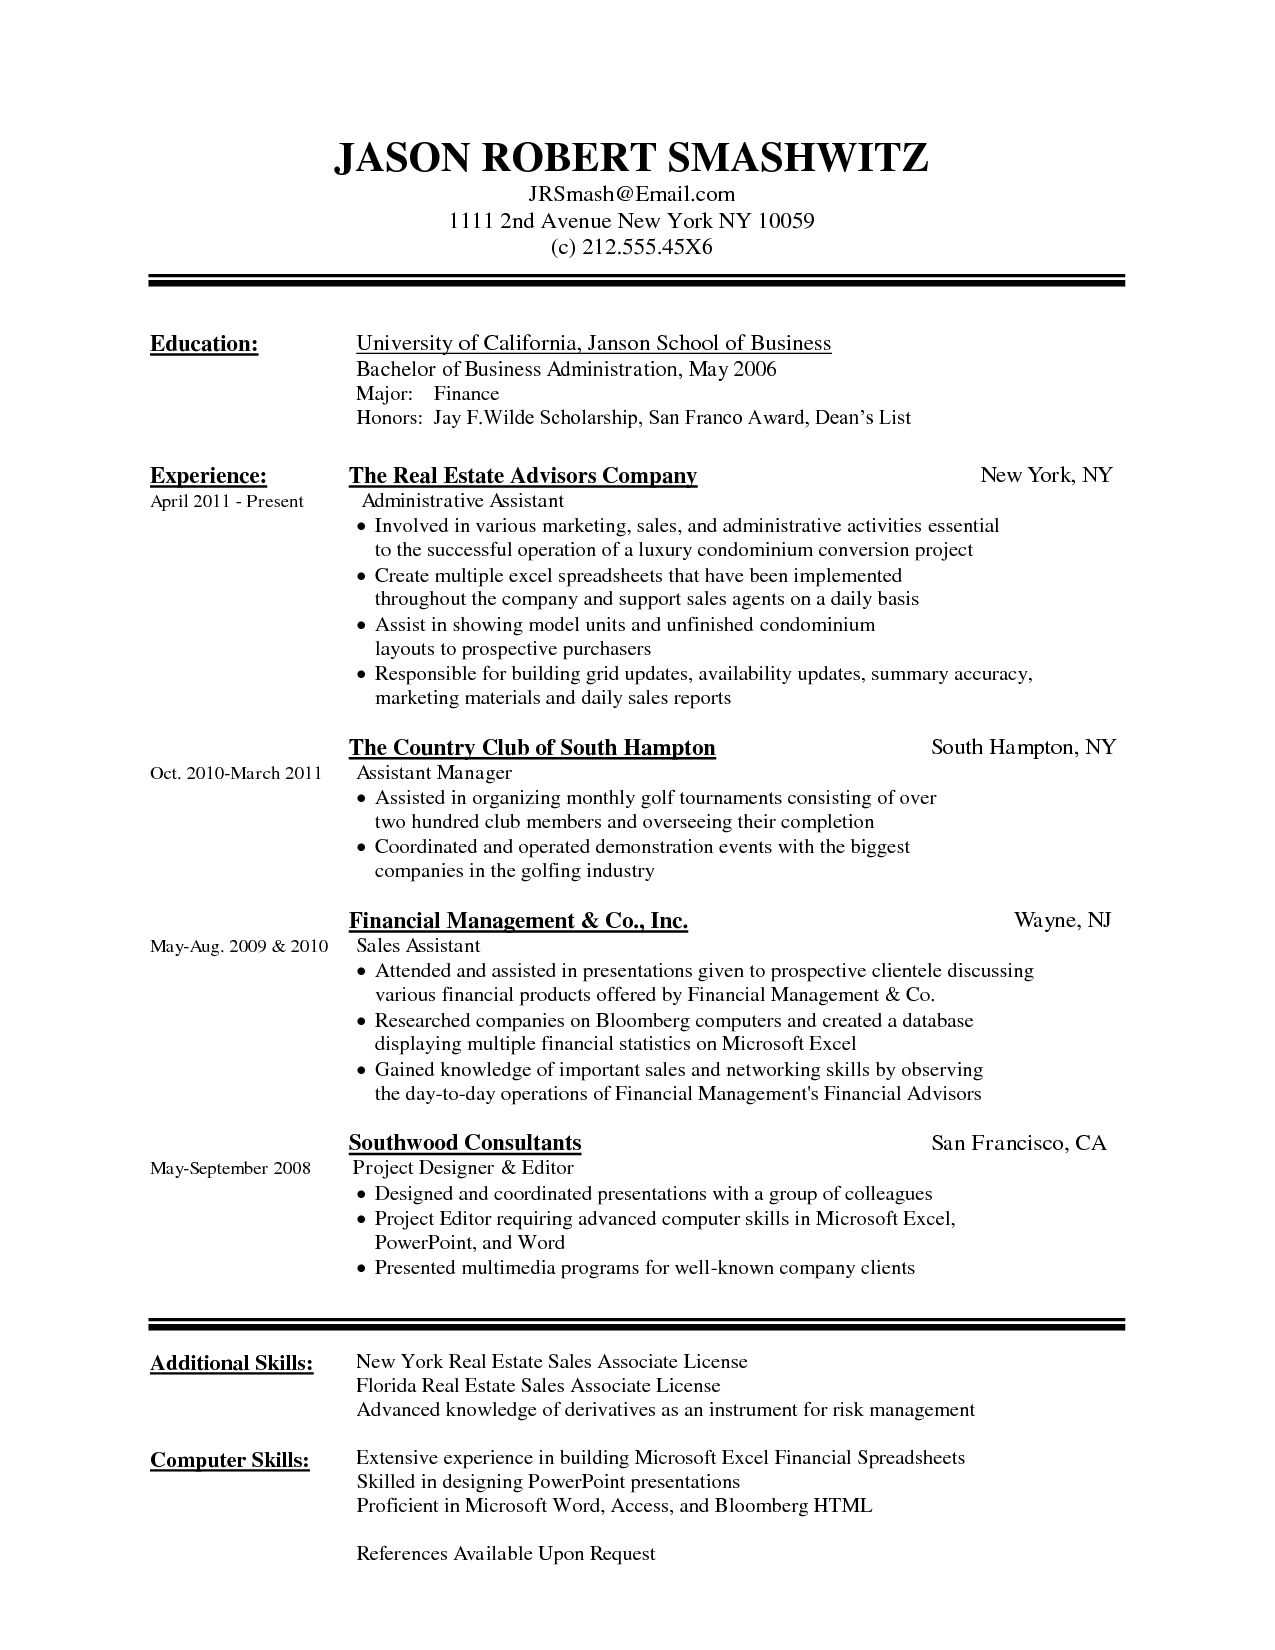 a resume template ms word free download